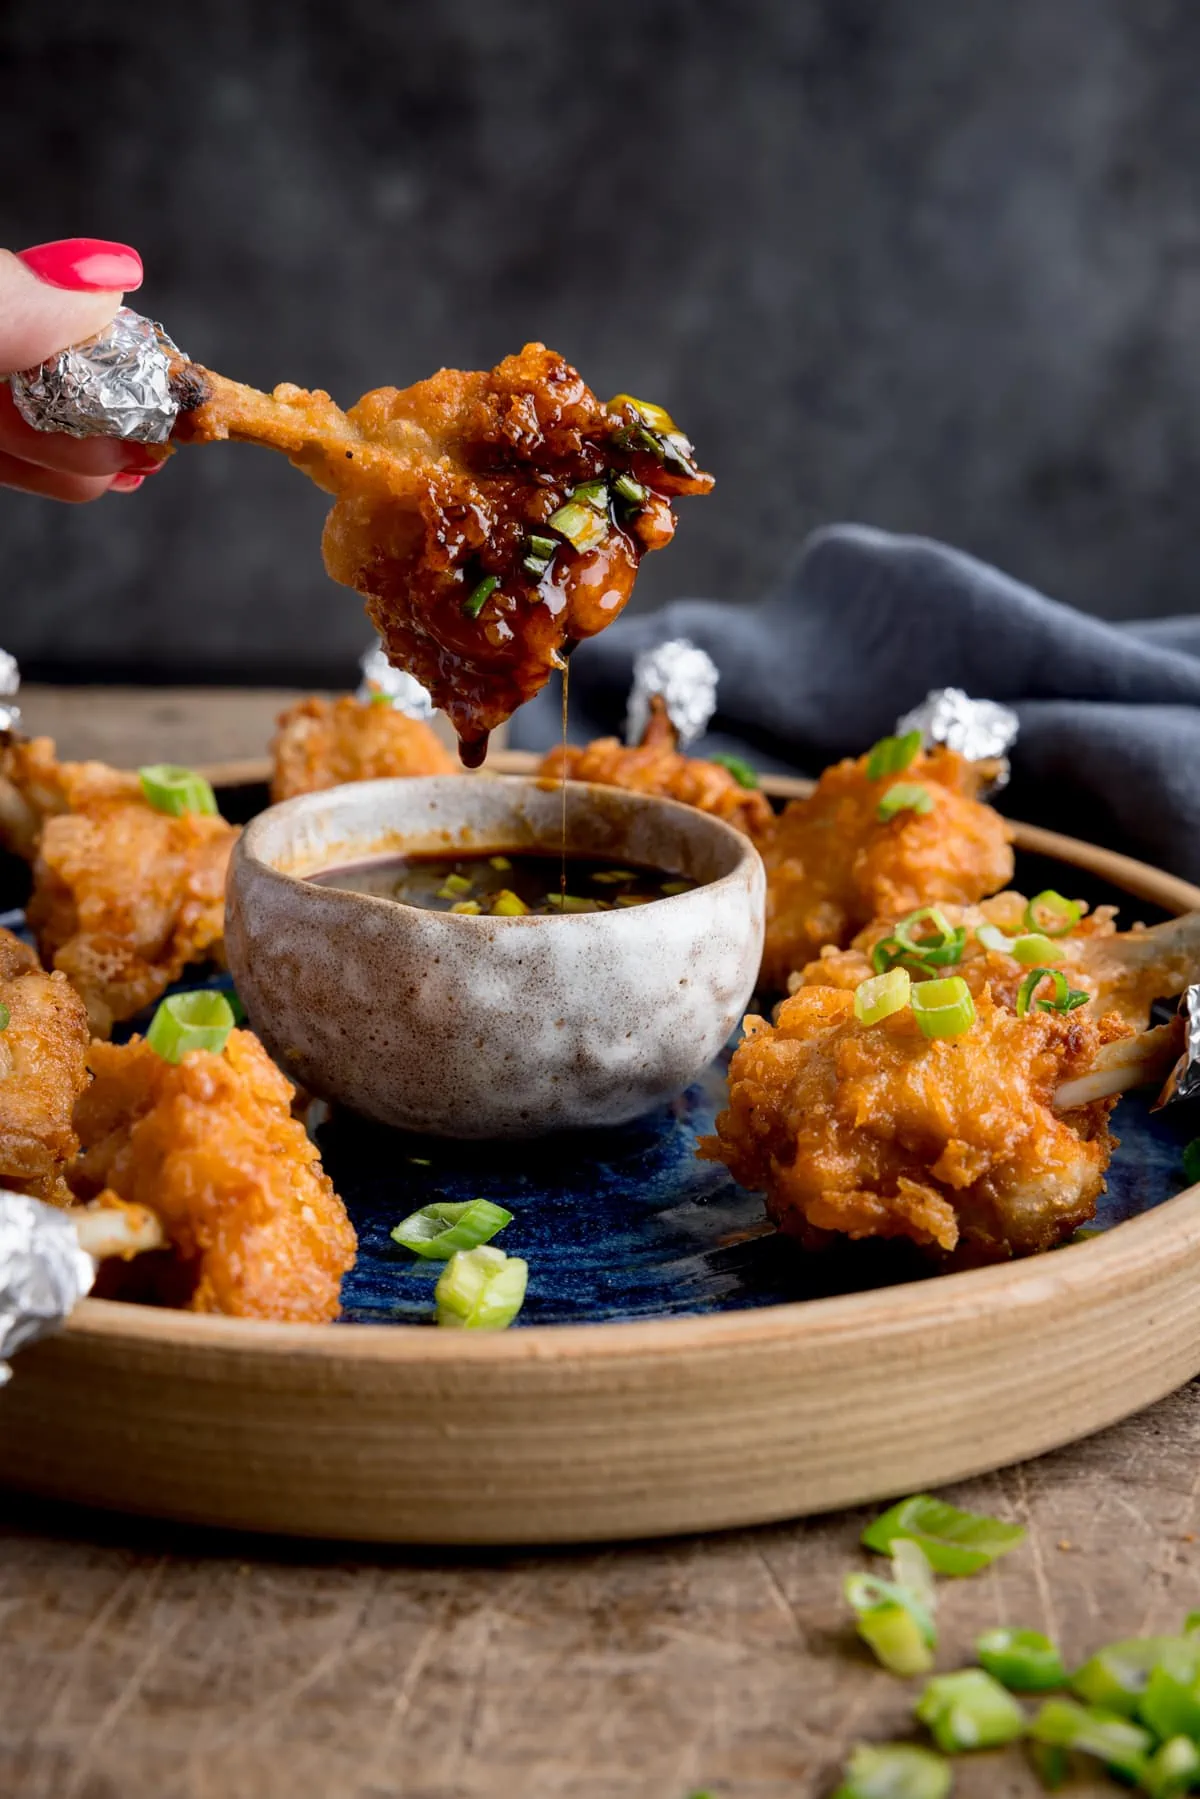 A plate of chicken lollipops with a bowl of spicy dipping sauce. One of the wings is being dipped into the sauce and is dripping. The wing is being held by fingers with pink-painted fingernails.